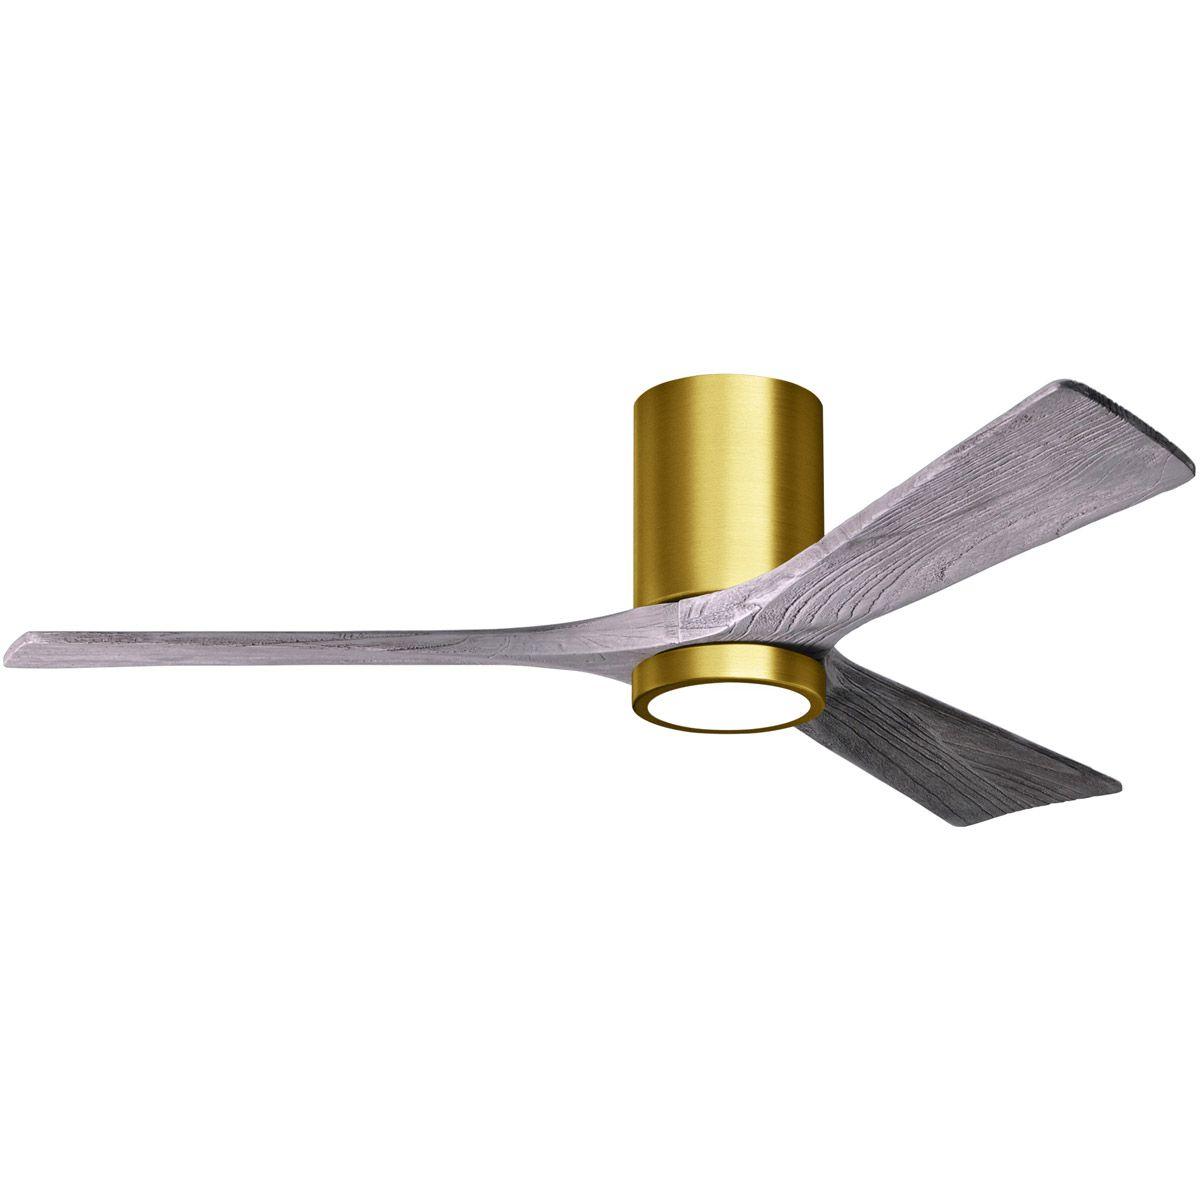 Irene 52 Inch Low Profile Outdoor Ceiling Fan With Light, Wall And Remote Control Included